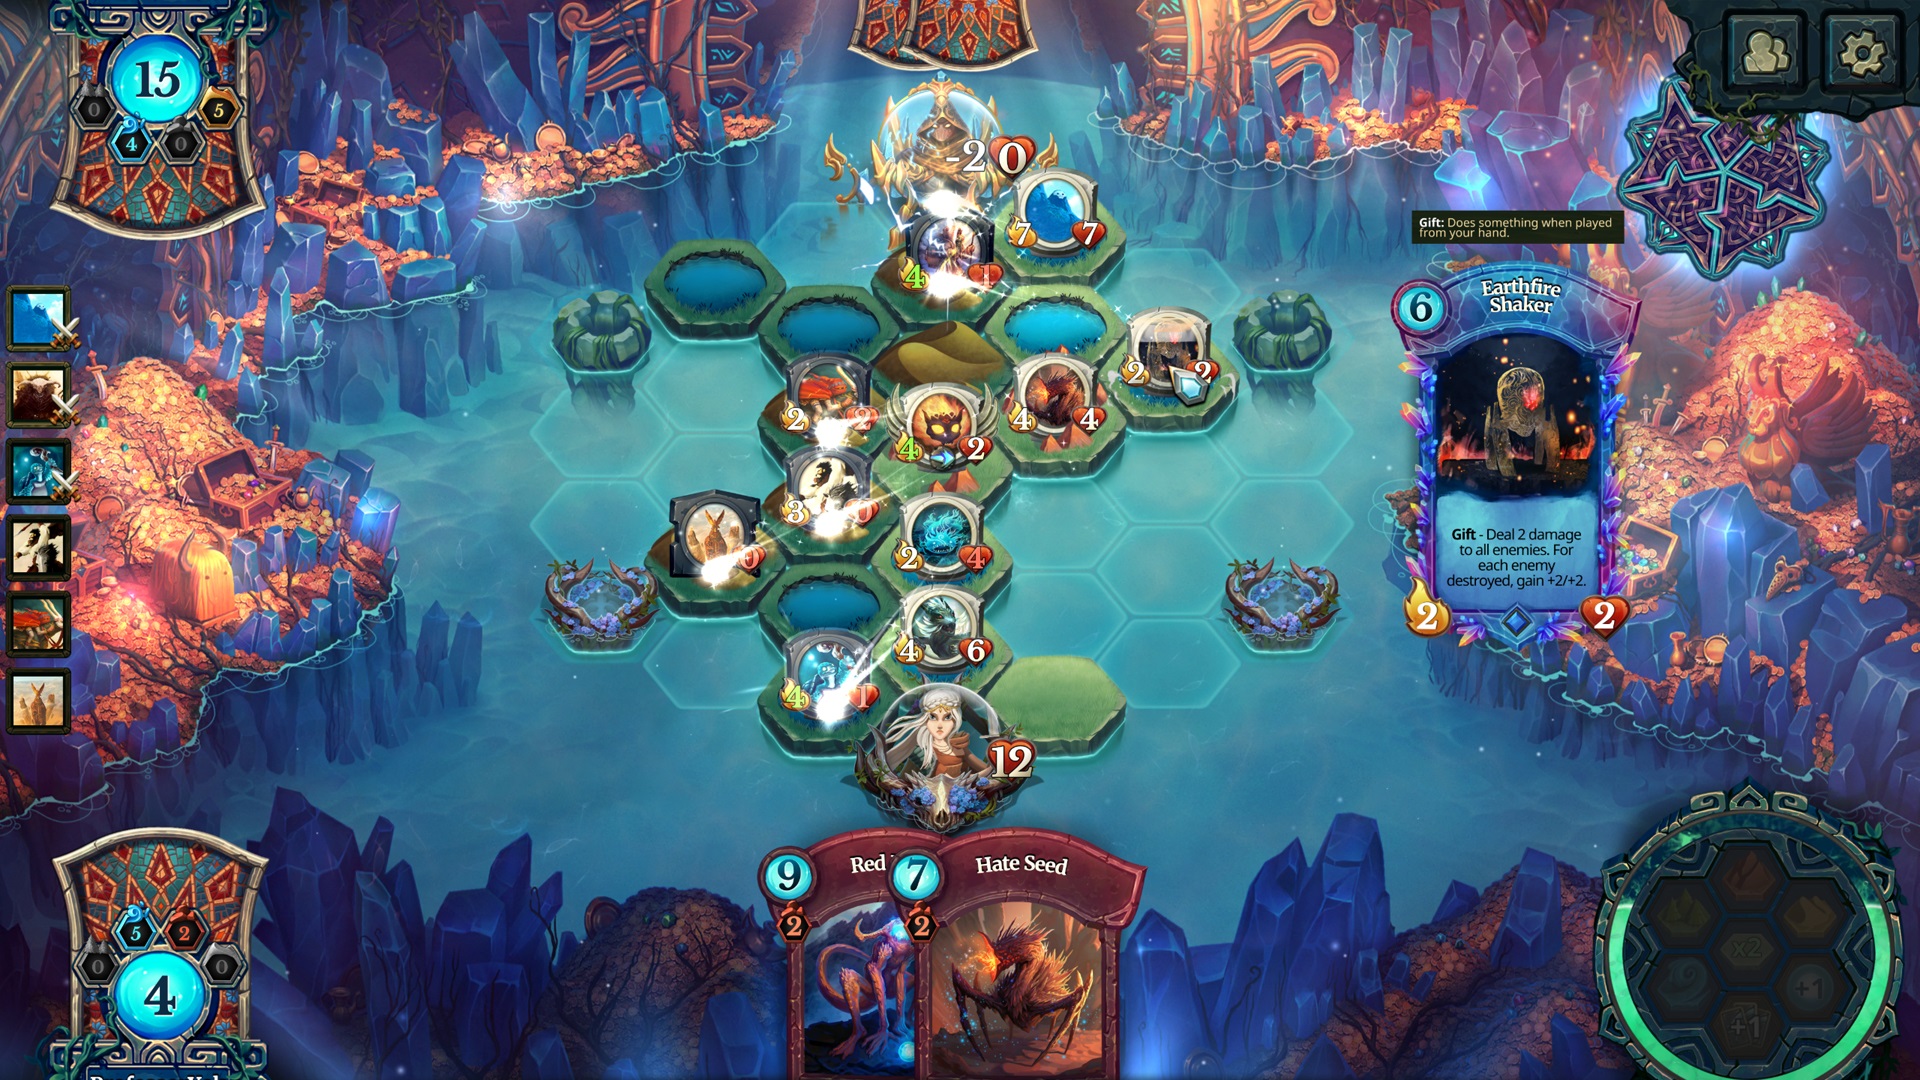 Fantasy Strategy Card Game Faeria Gets a PS4 Port on November 3